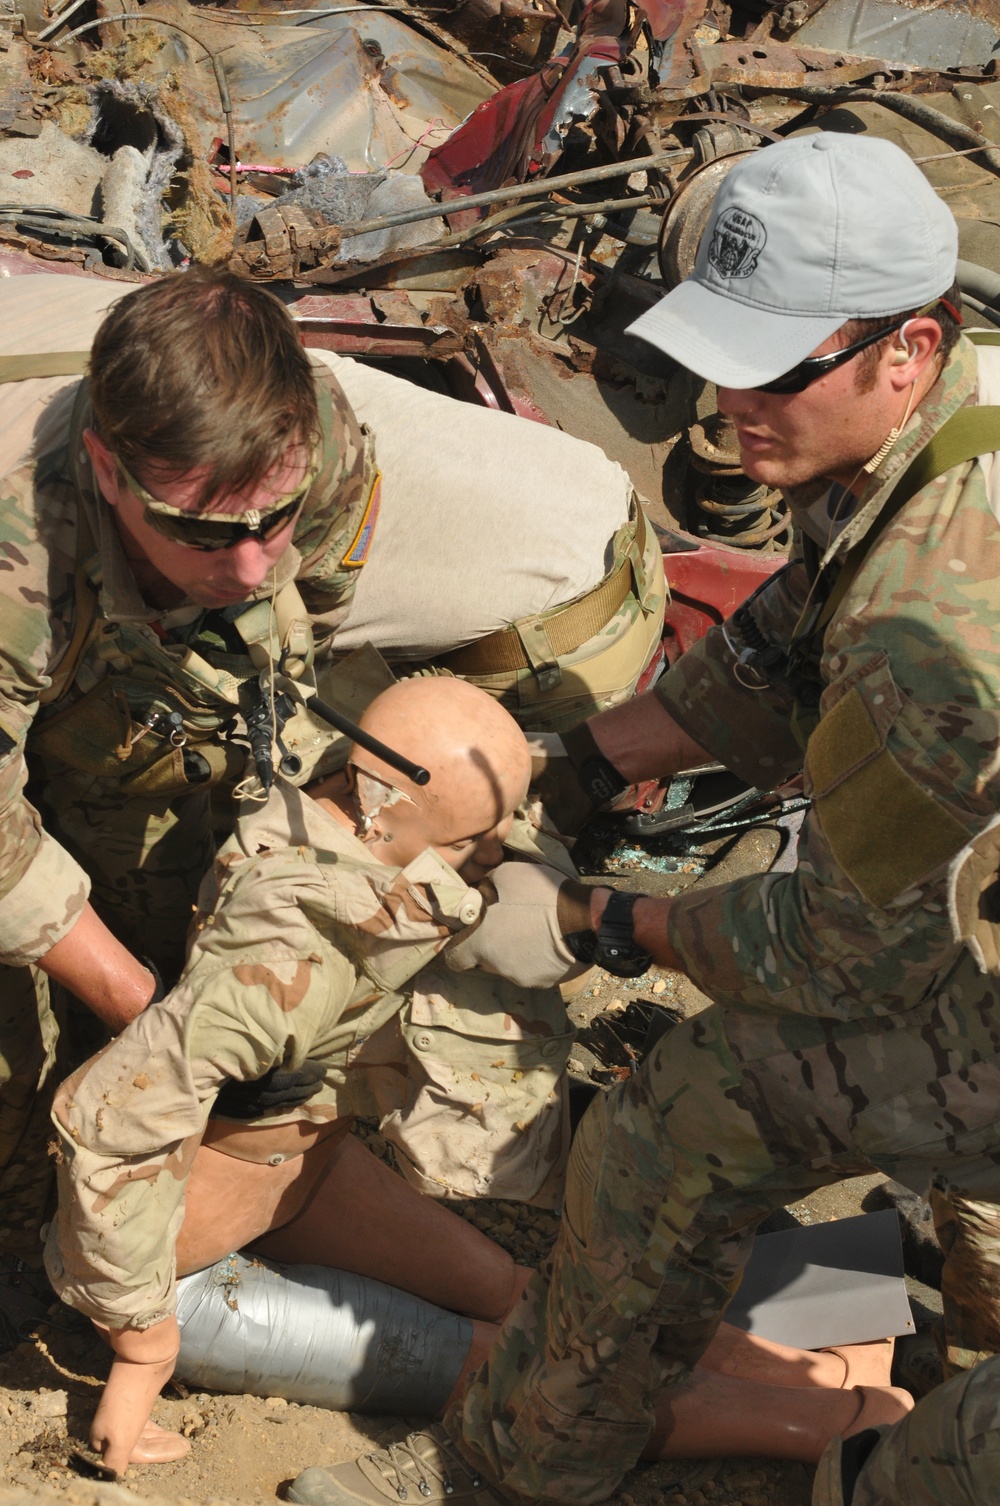 National Guard Pararescue members hone skills in domestic rescue and recovery efforts